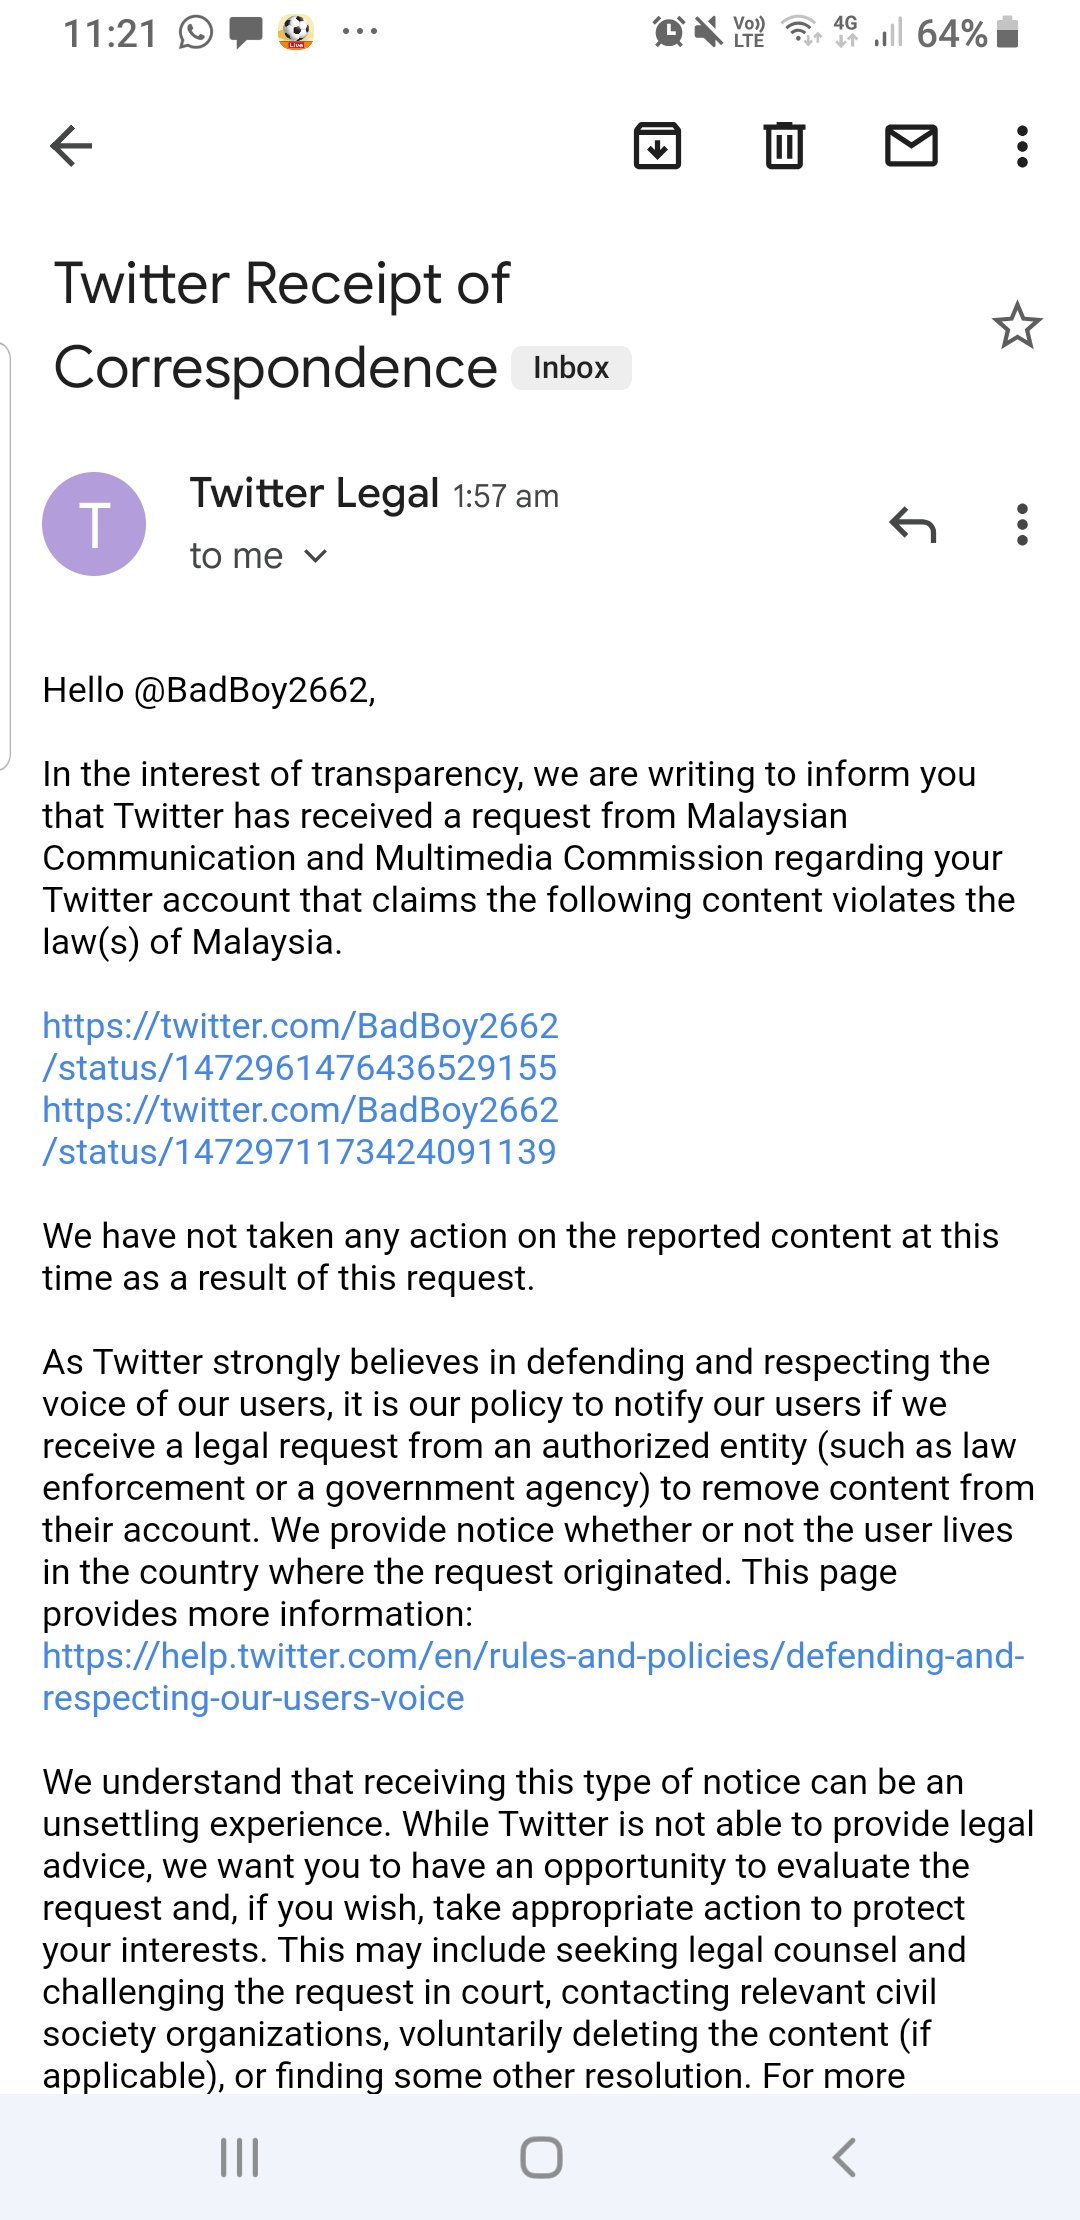 Twitter sending an email to the netizen informing about MCMC's request.